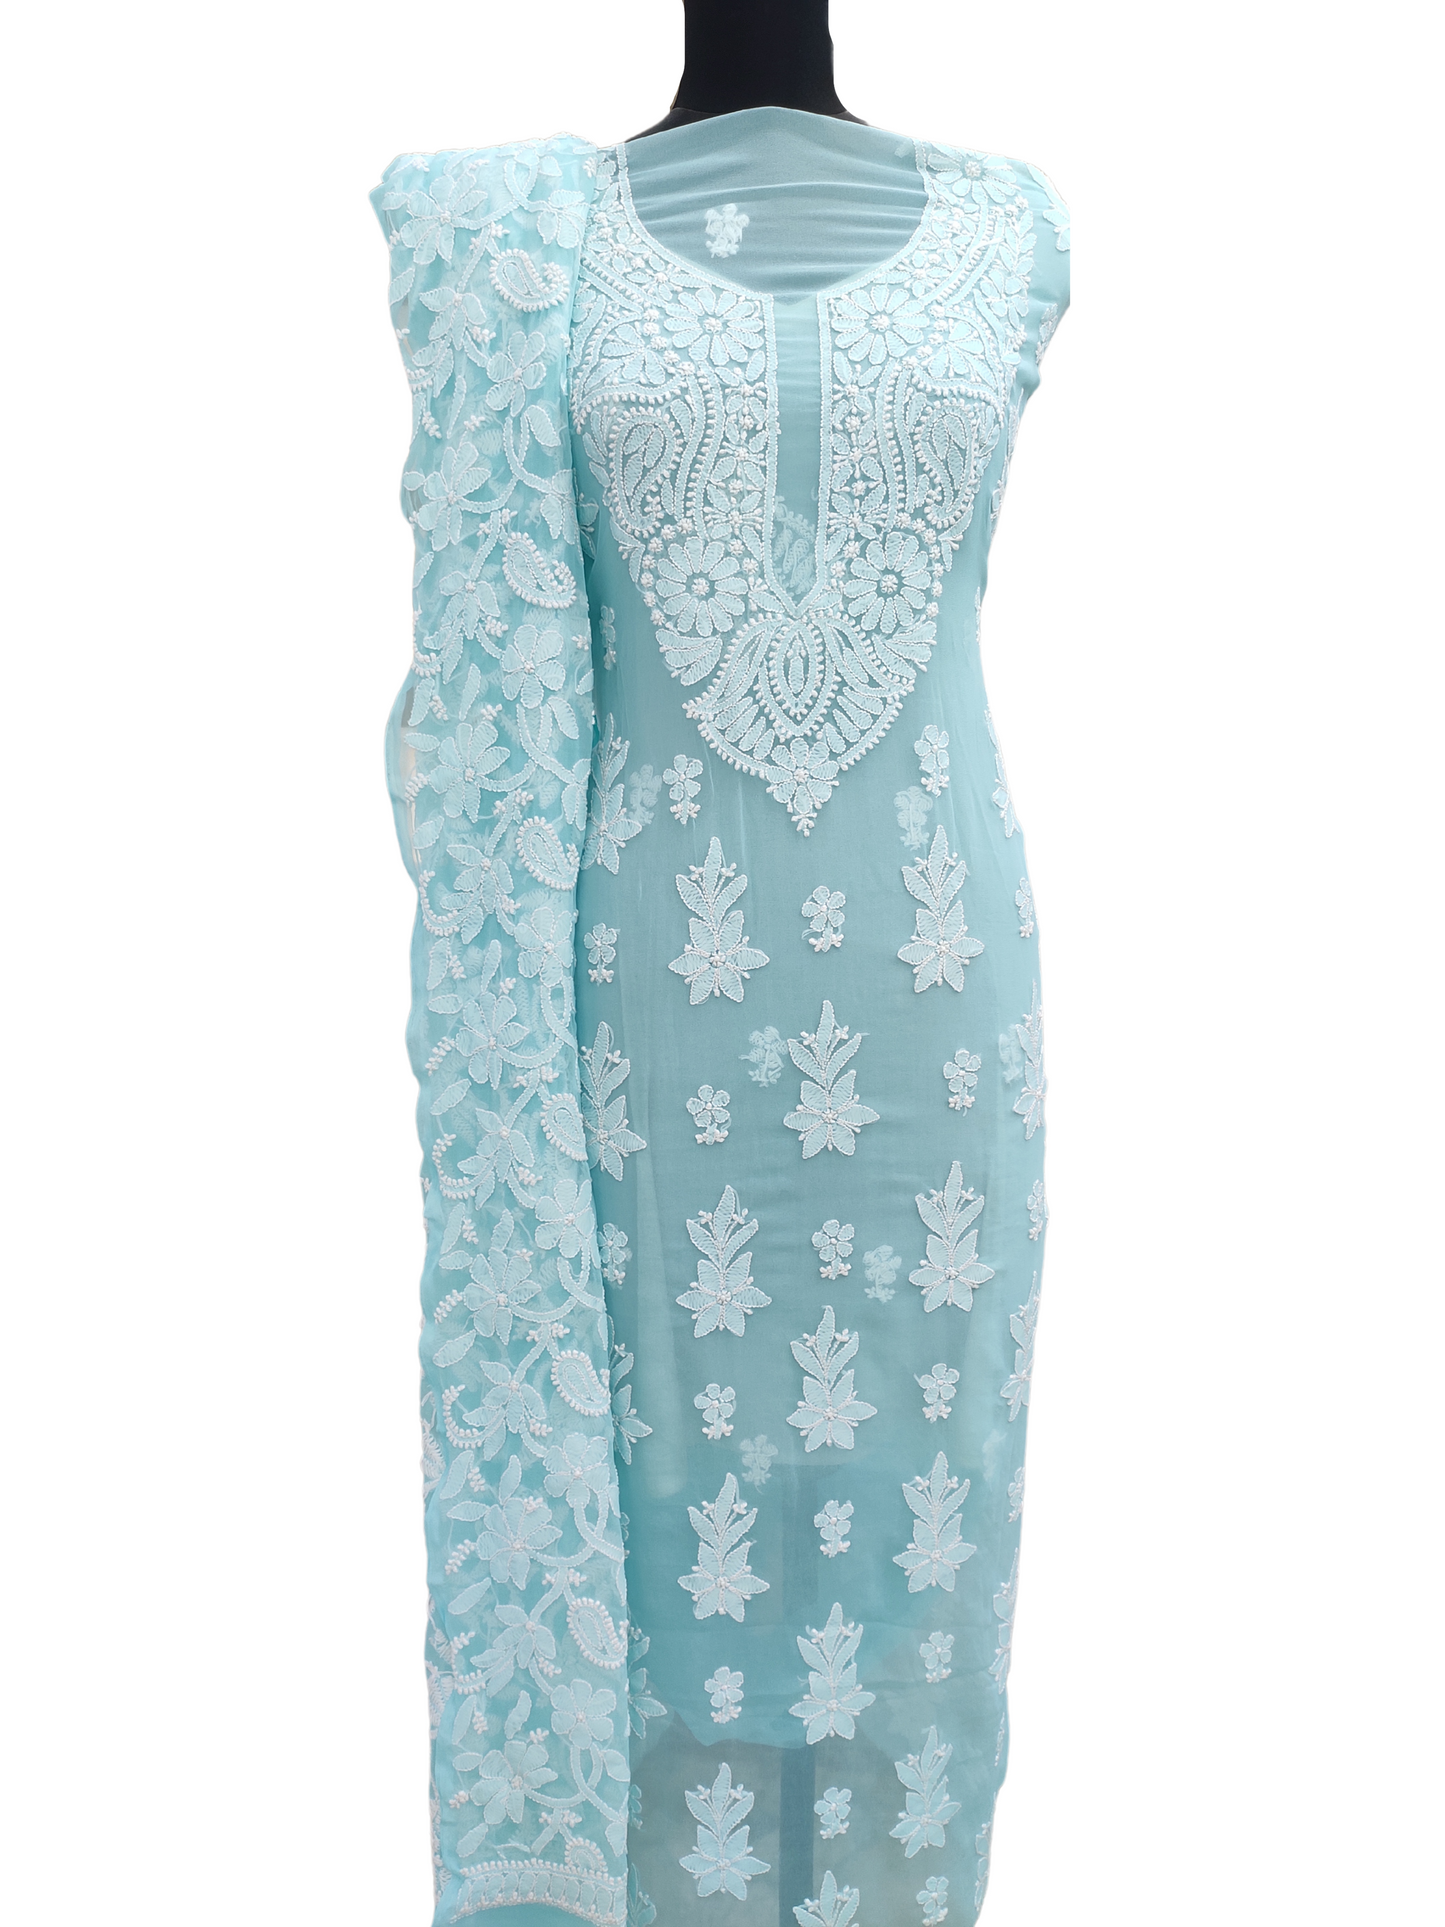 Shyamal Chikan Hand Embroidered Light Blue High Quality Georgette Lucknowi Chikankari Unstitched Suit Piece With Full Jaal Dupatta - S12588 - Shyamal Chikan